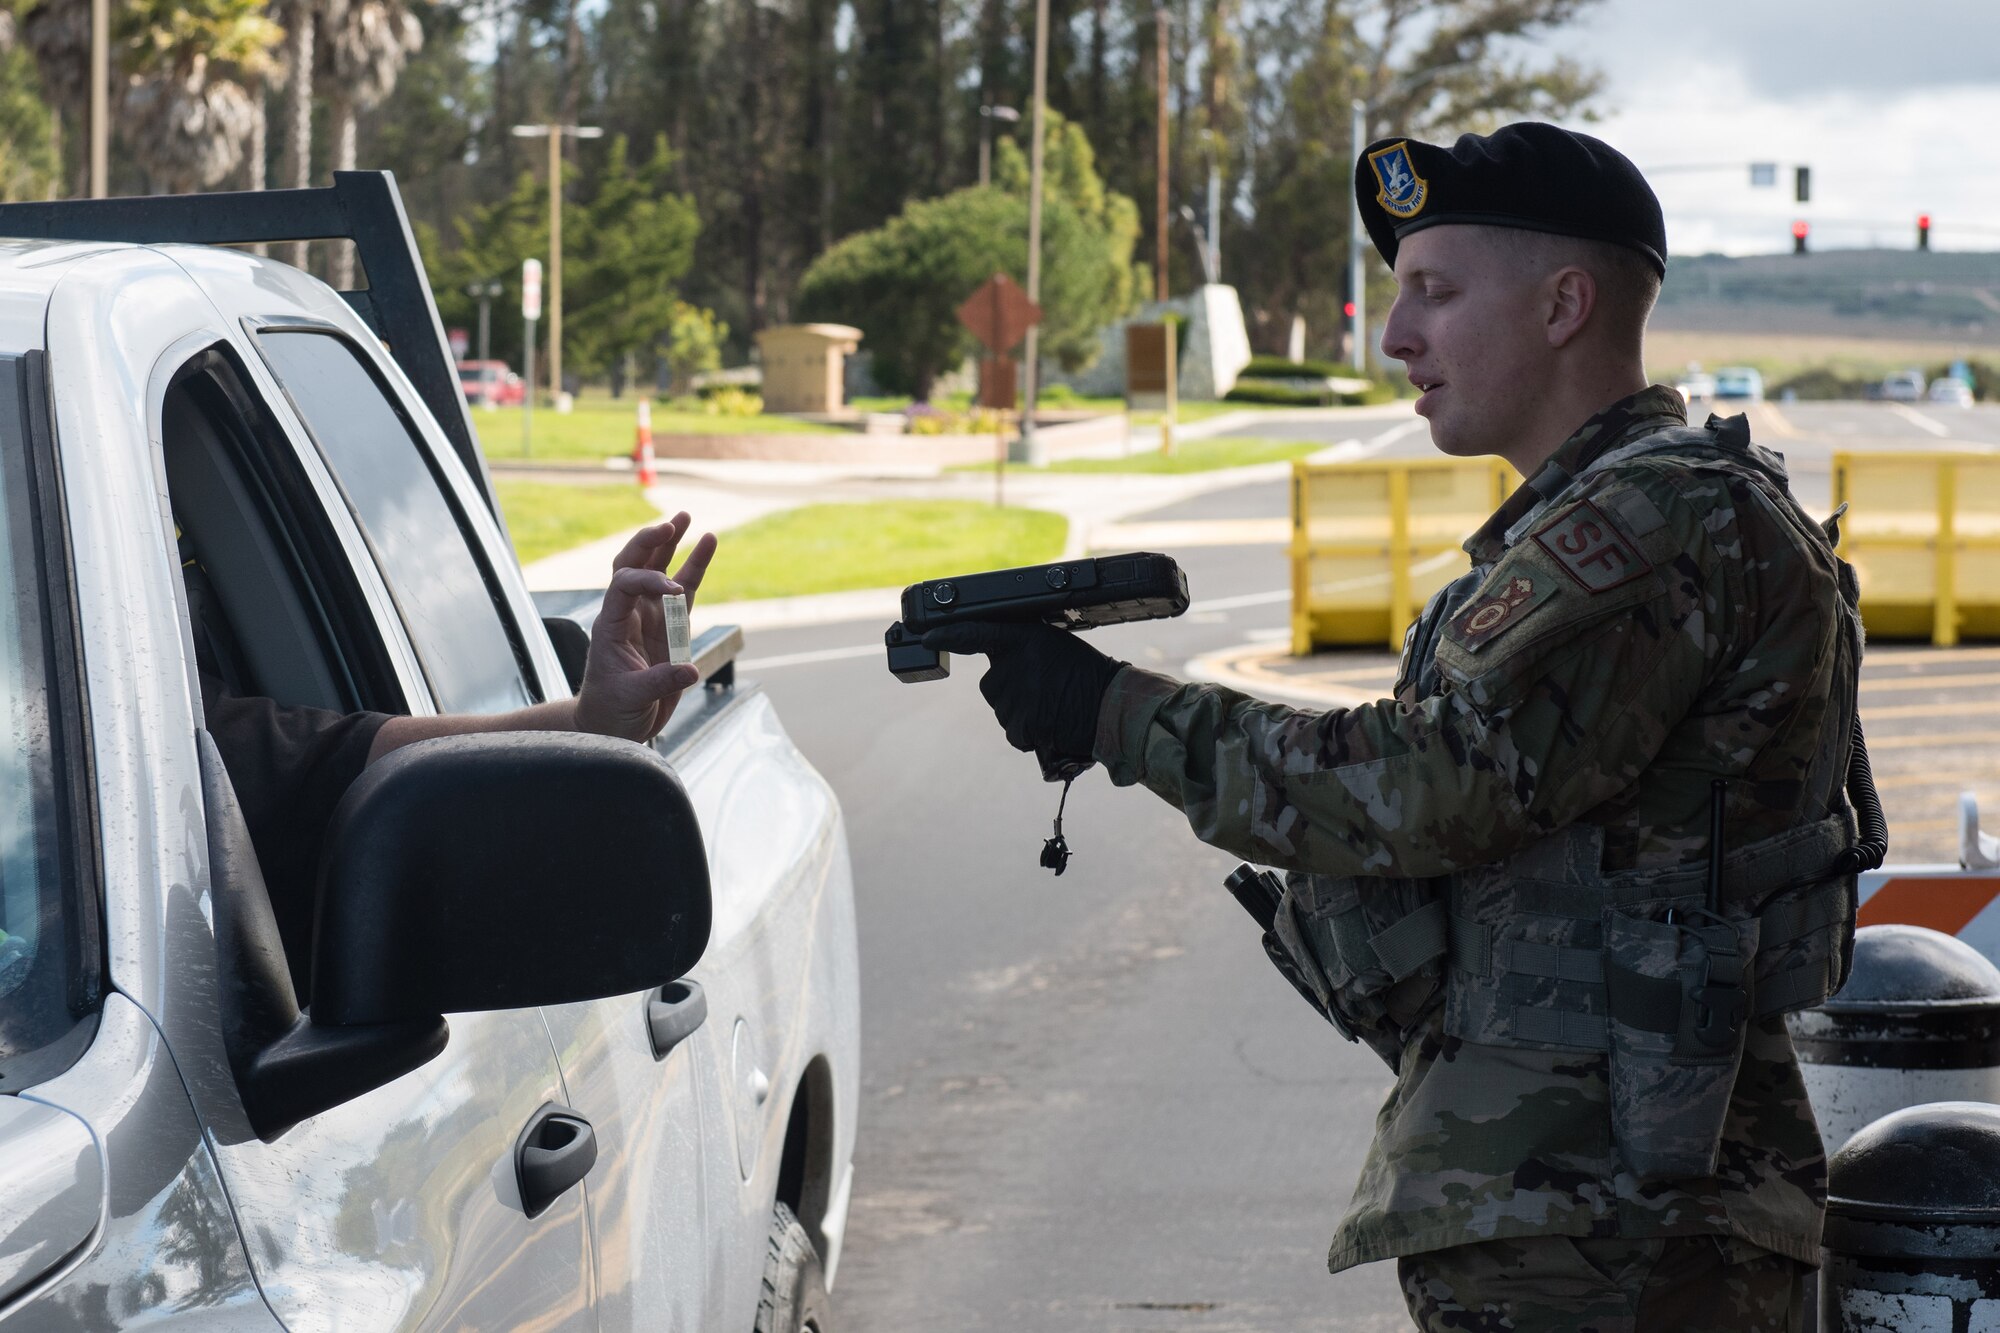 Photo of Airman checking ID at the gate